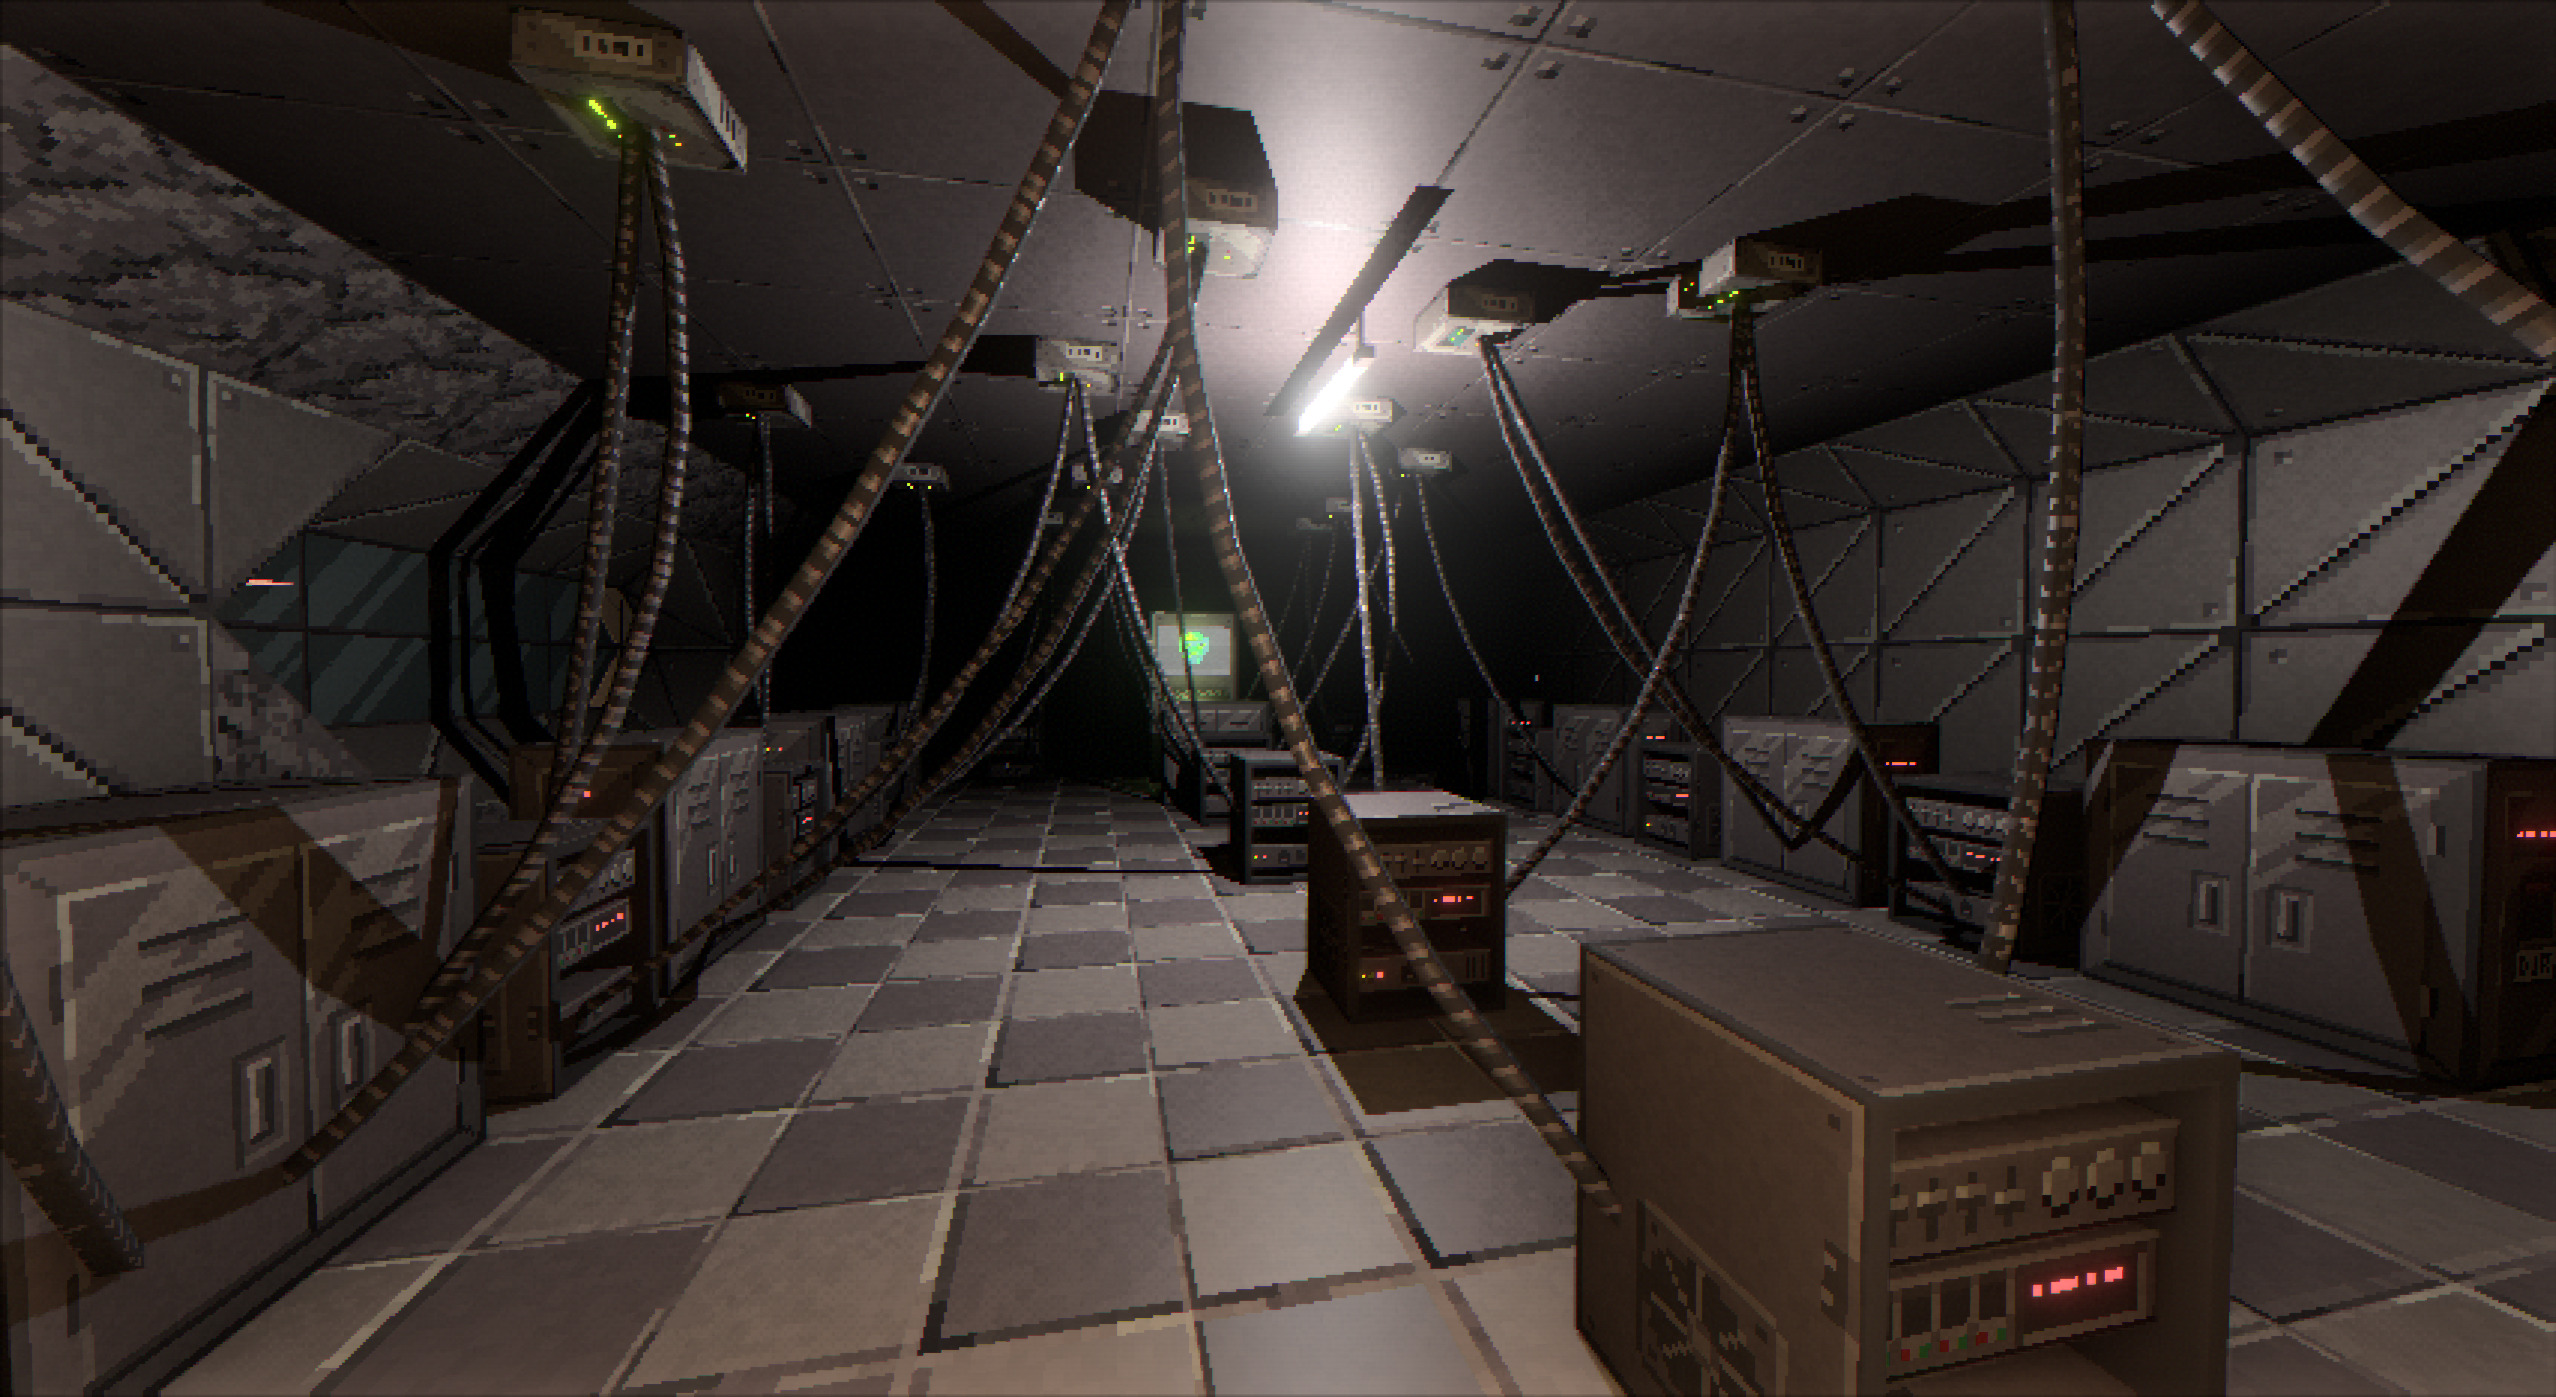 The Subnetwork Chamber